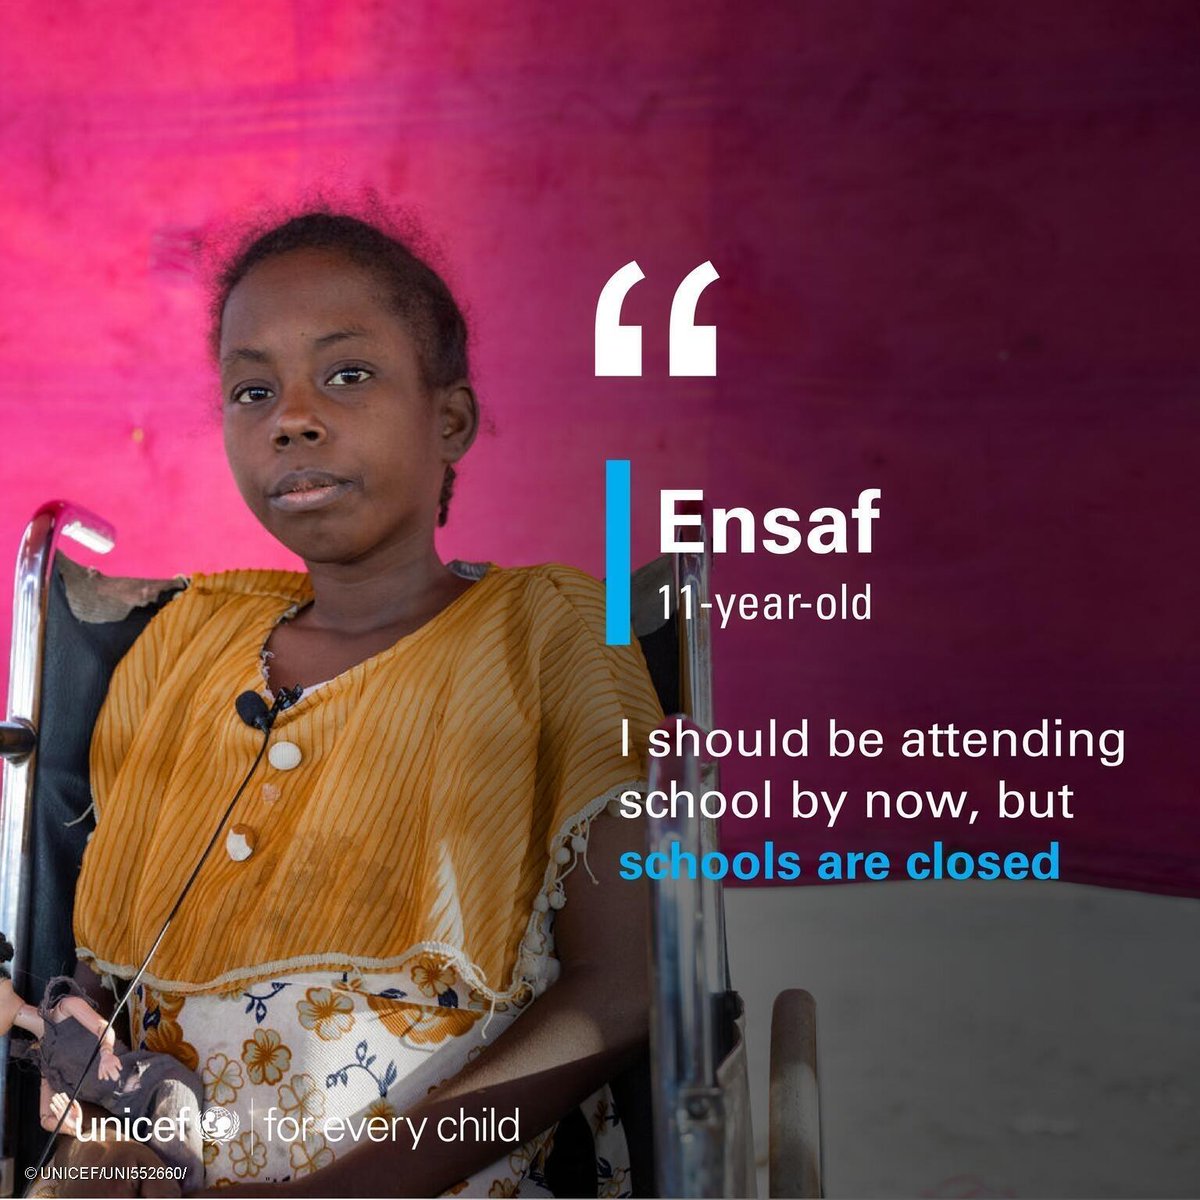 Almost 19 million children in #Sudan are not in school. Without learning, children are robbed of their future. Before the war, Ensaf dreamt of becoming the first female pilot in Sudan. #ForEveryChild, education.